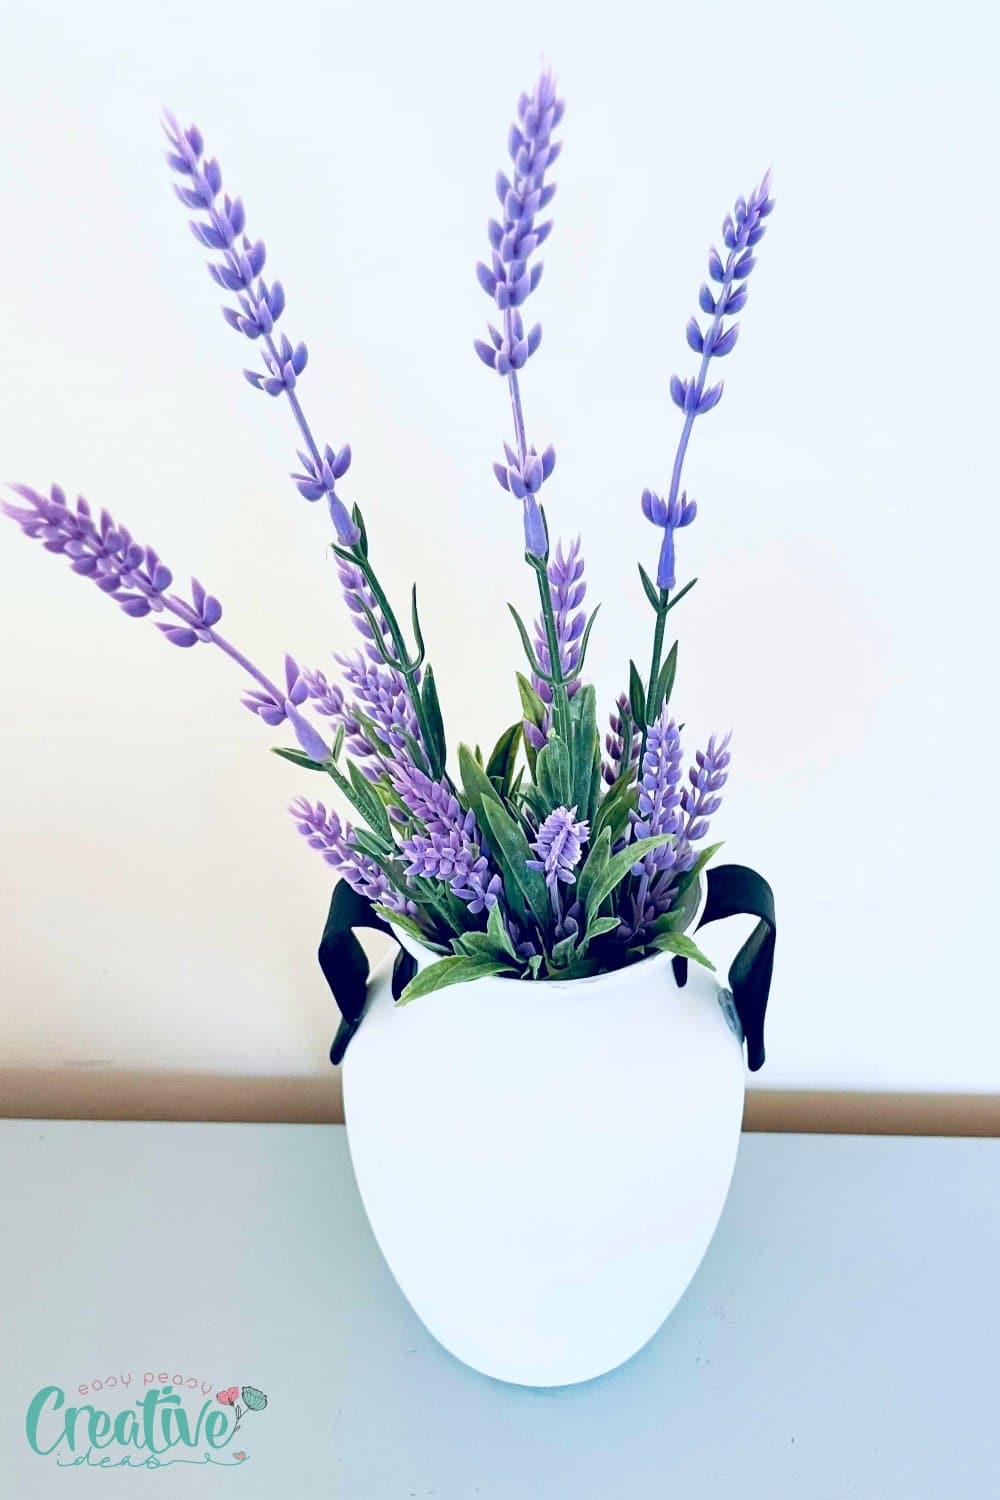 Angle image of a DIY vase idea inspired by the Pottery Barn dupe vase